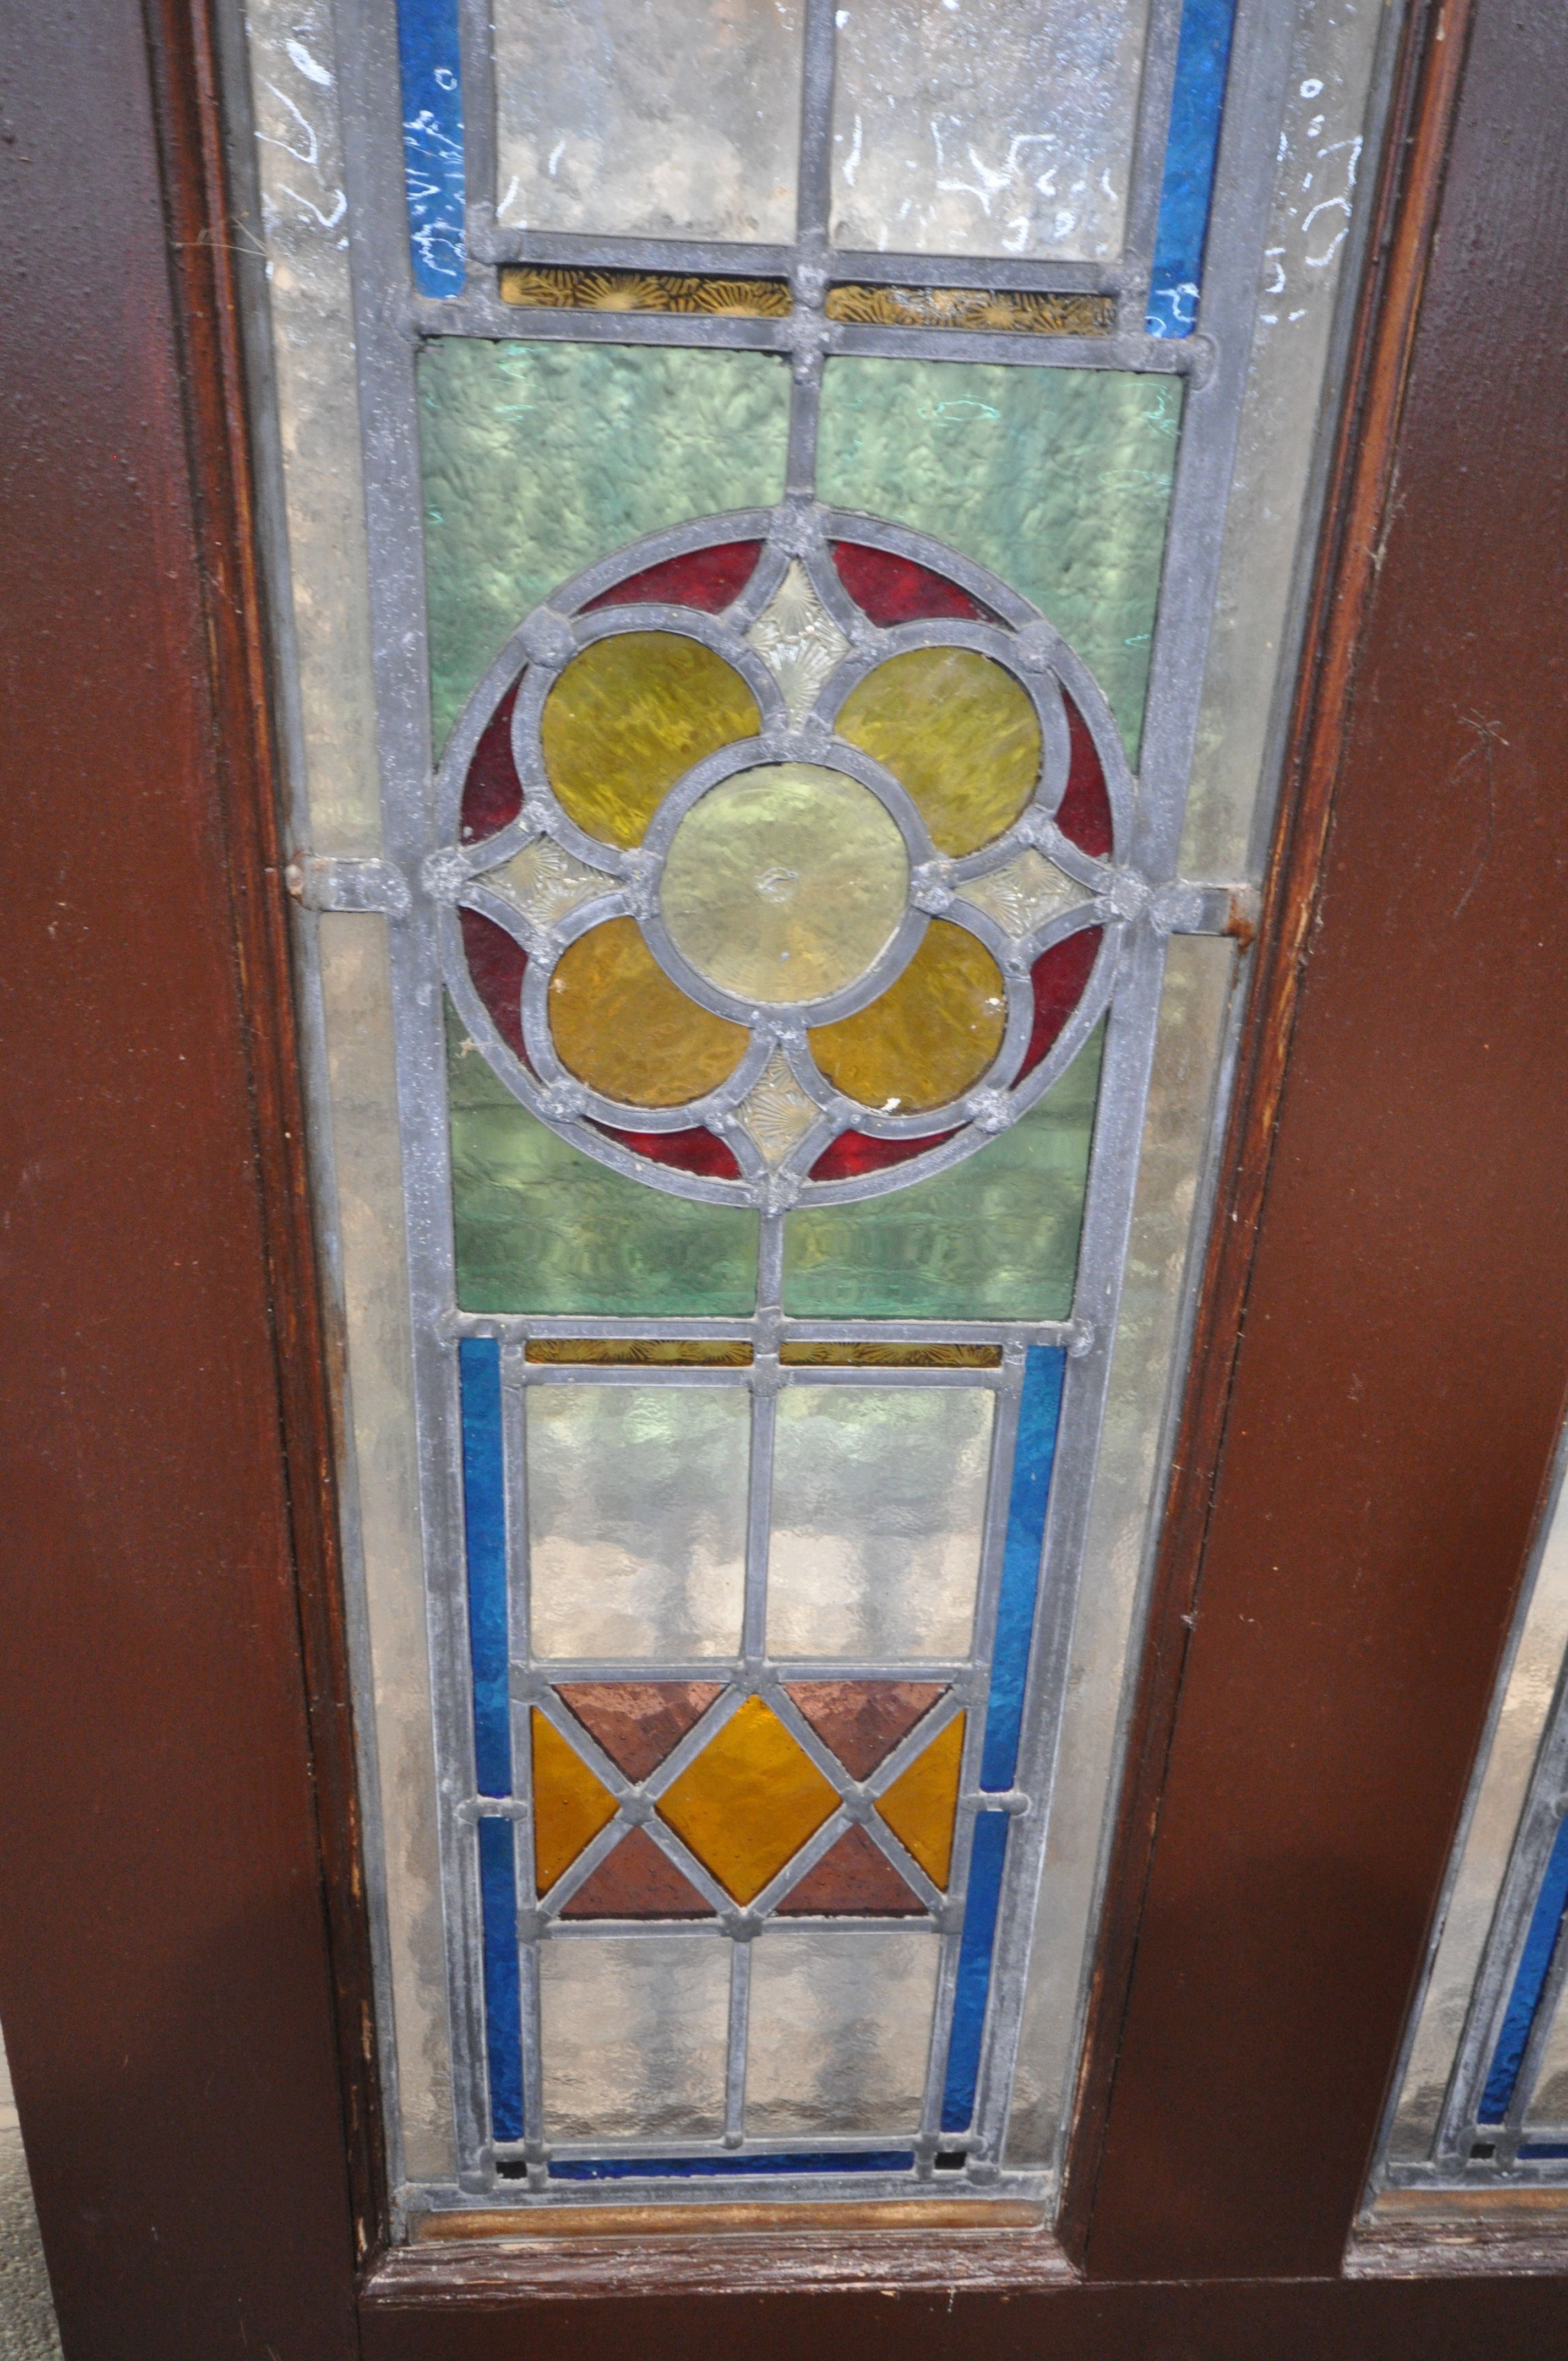 FOUR SIZED INTERNAL DOORS, each with lead glazed stain glass windows, depicting various patterns and - Image 7 of 10